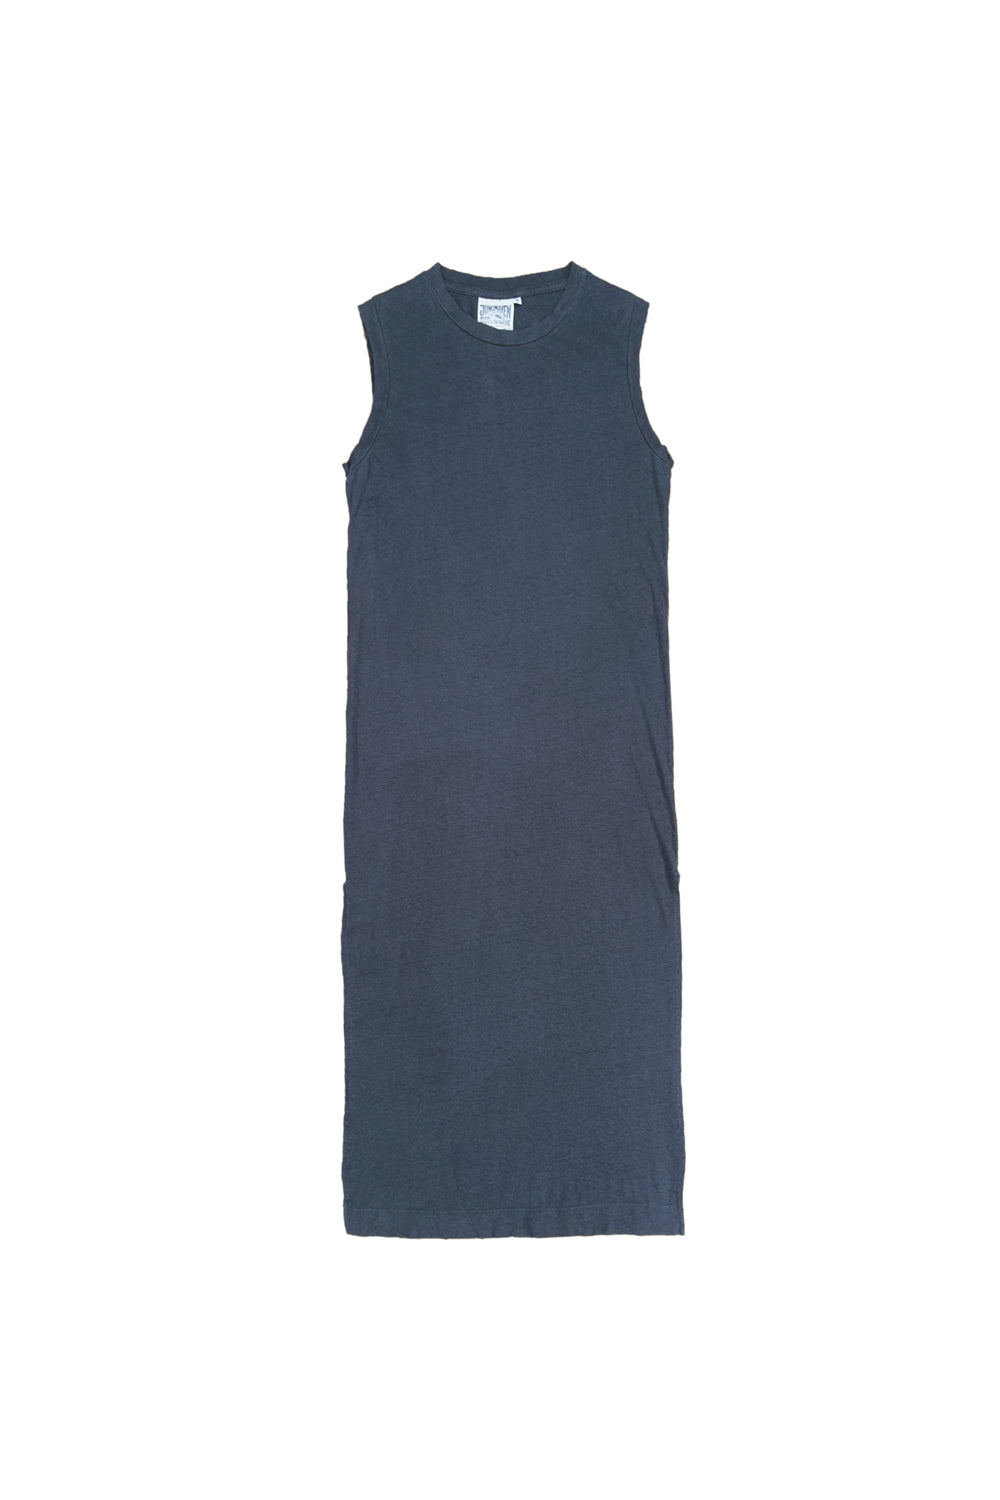 jungmaven hermosa dress - Made with a soft + breezy lightweight hemp blend, with bra-friendly straps and a side slit for easy movement. The relaxed shape is both flattering and laid back, dress it up with a jacket and boots or pair with flats for a casual cool look.